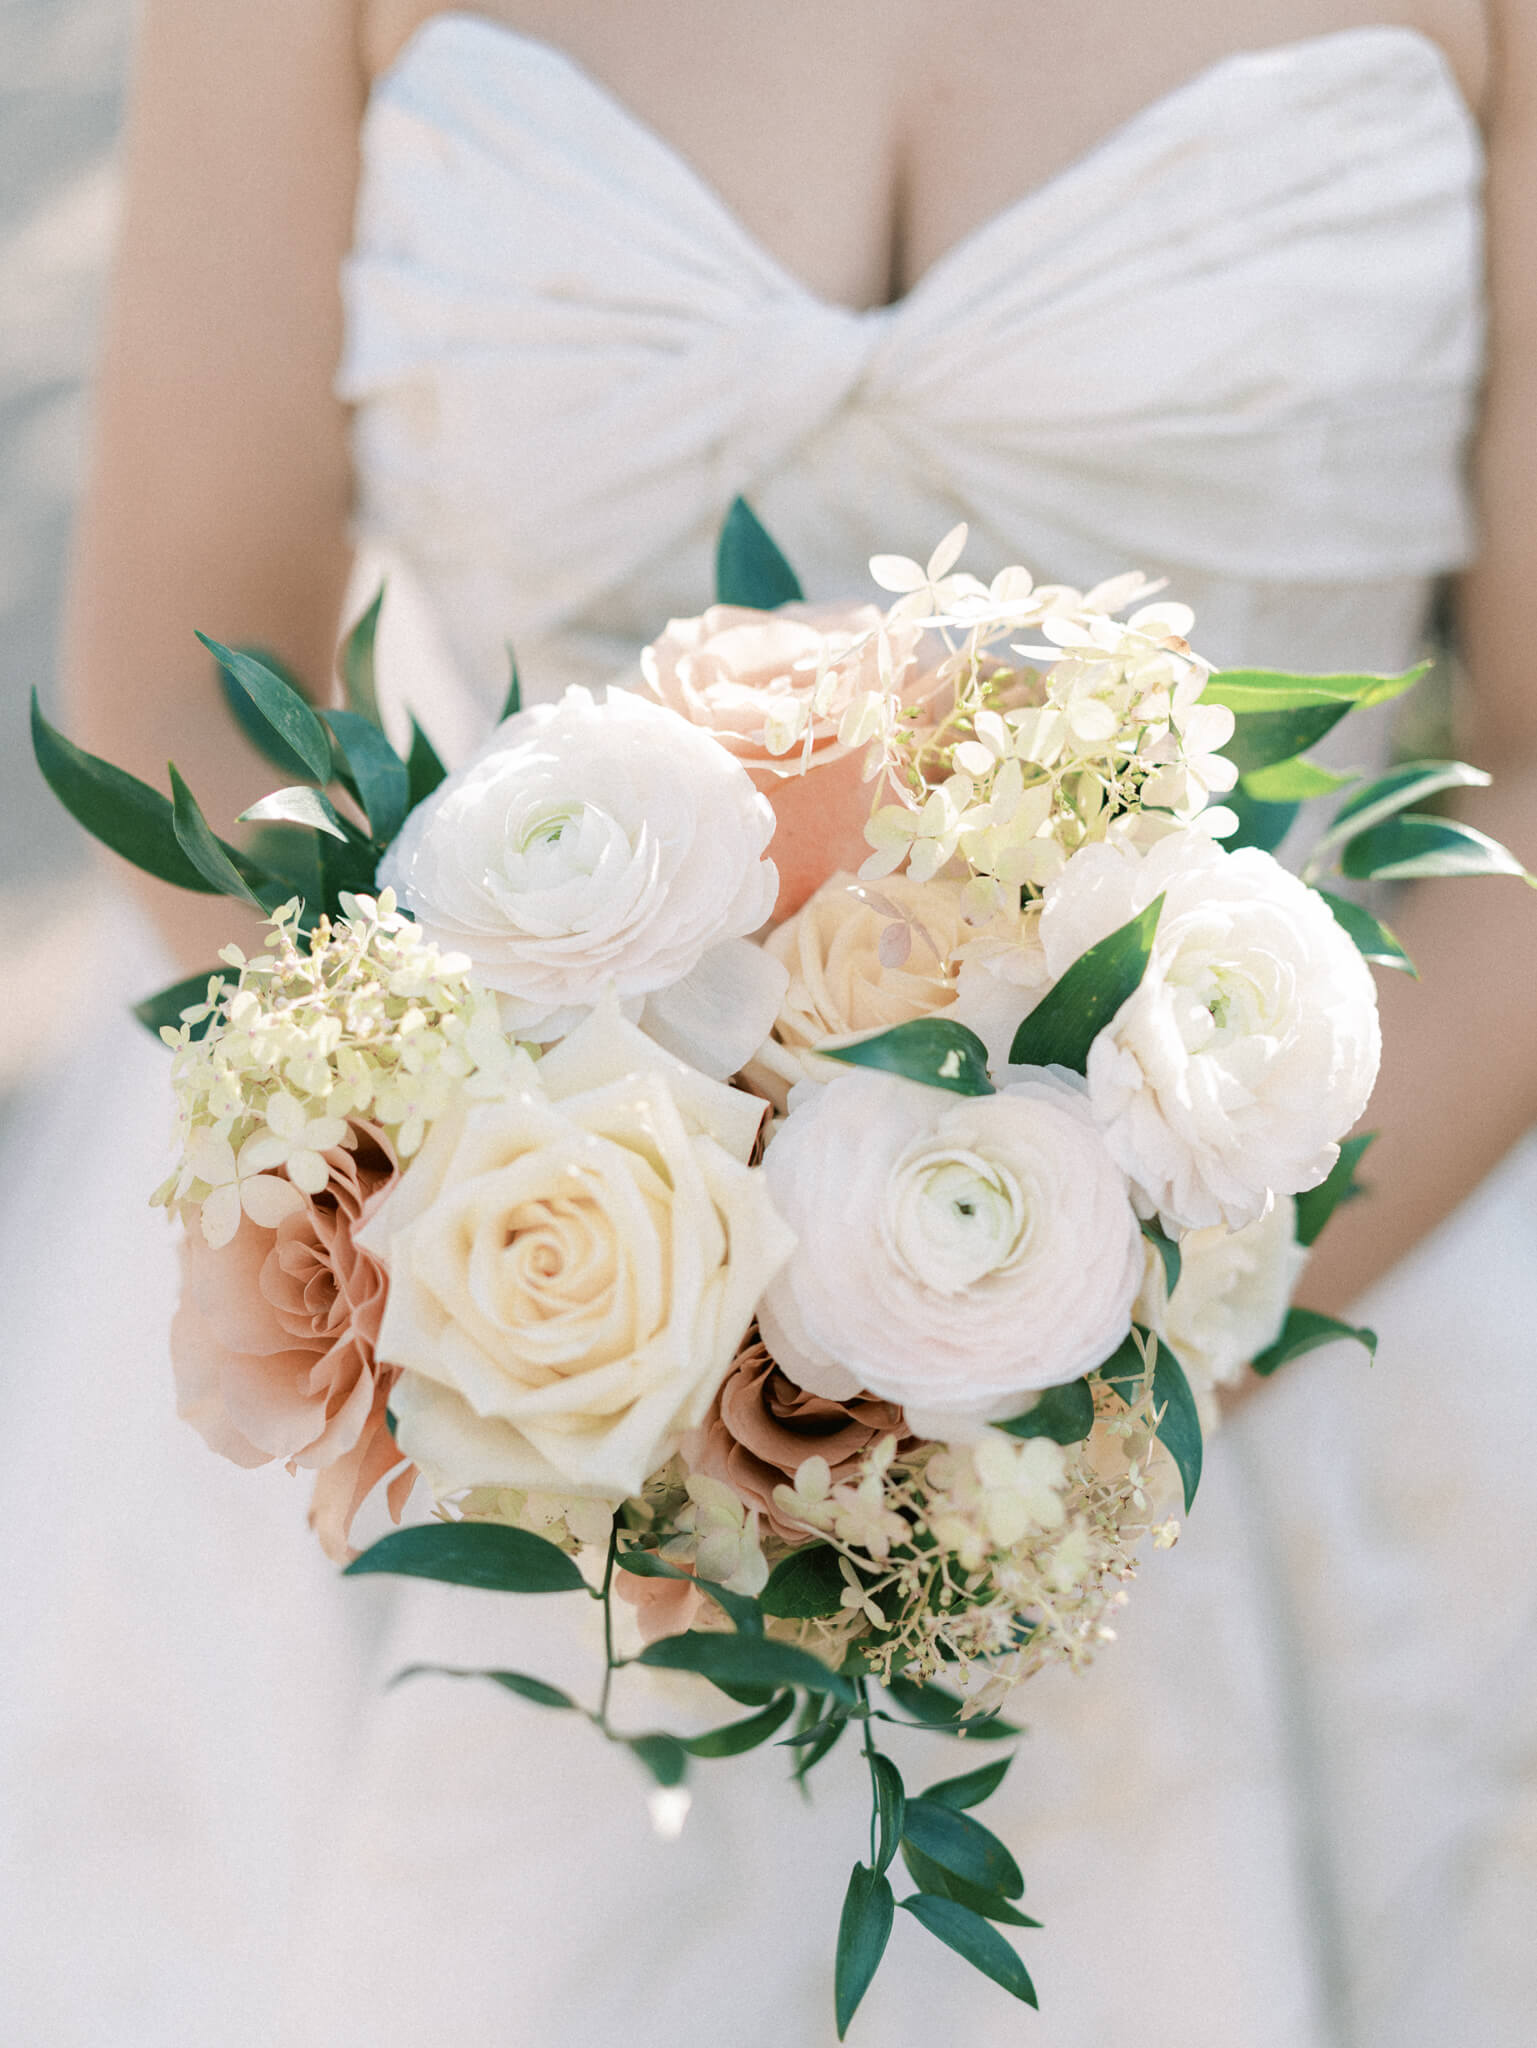 Closeup of a bride holding a bouquet of cream and peach colored roses with white ranunculus and hydreangeas.